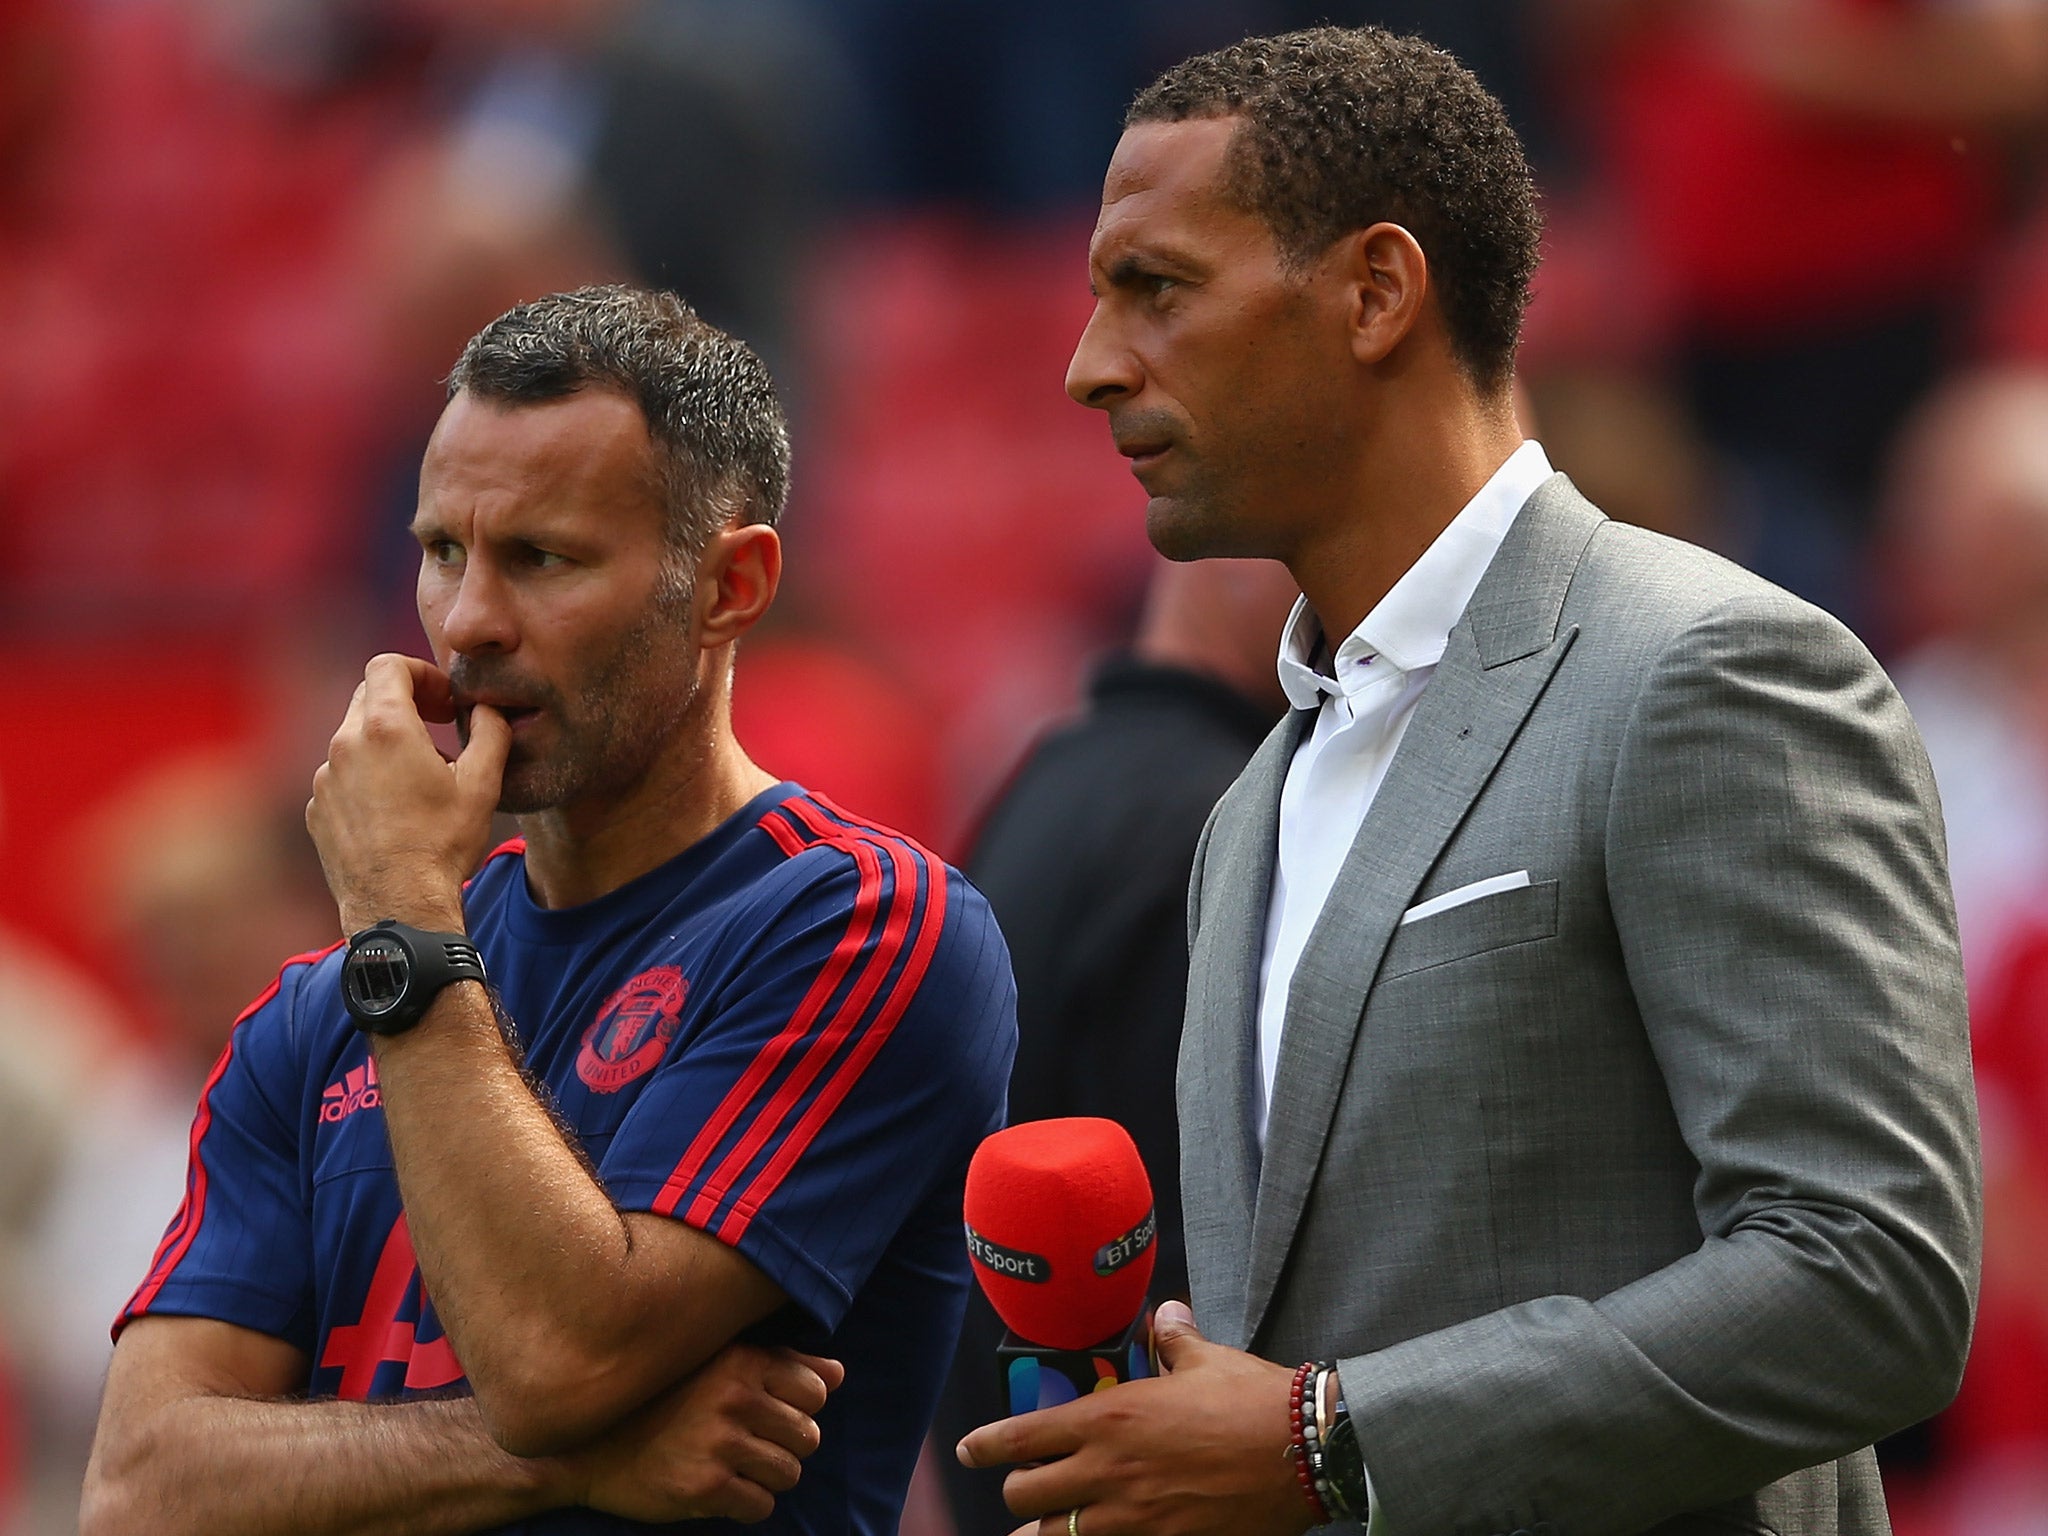 Ryan Giggs speaks with Rio Ferdinand ahead of a Manchester United match last season